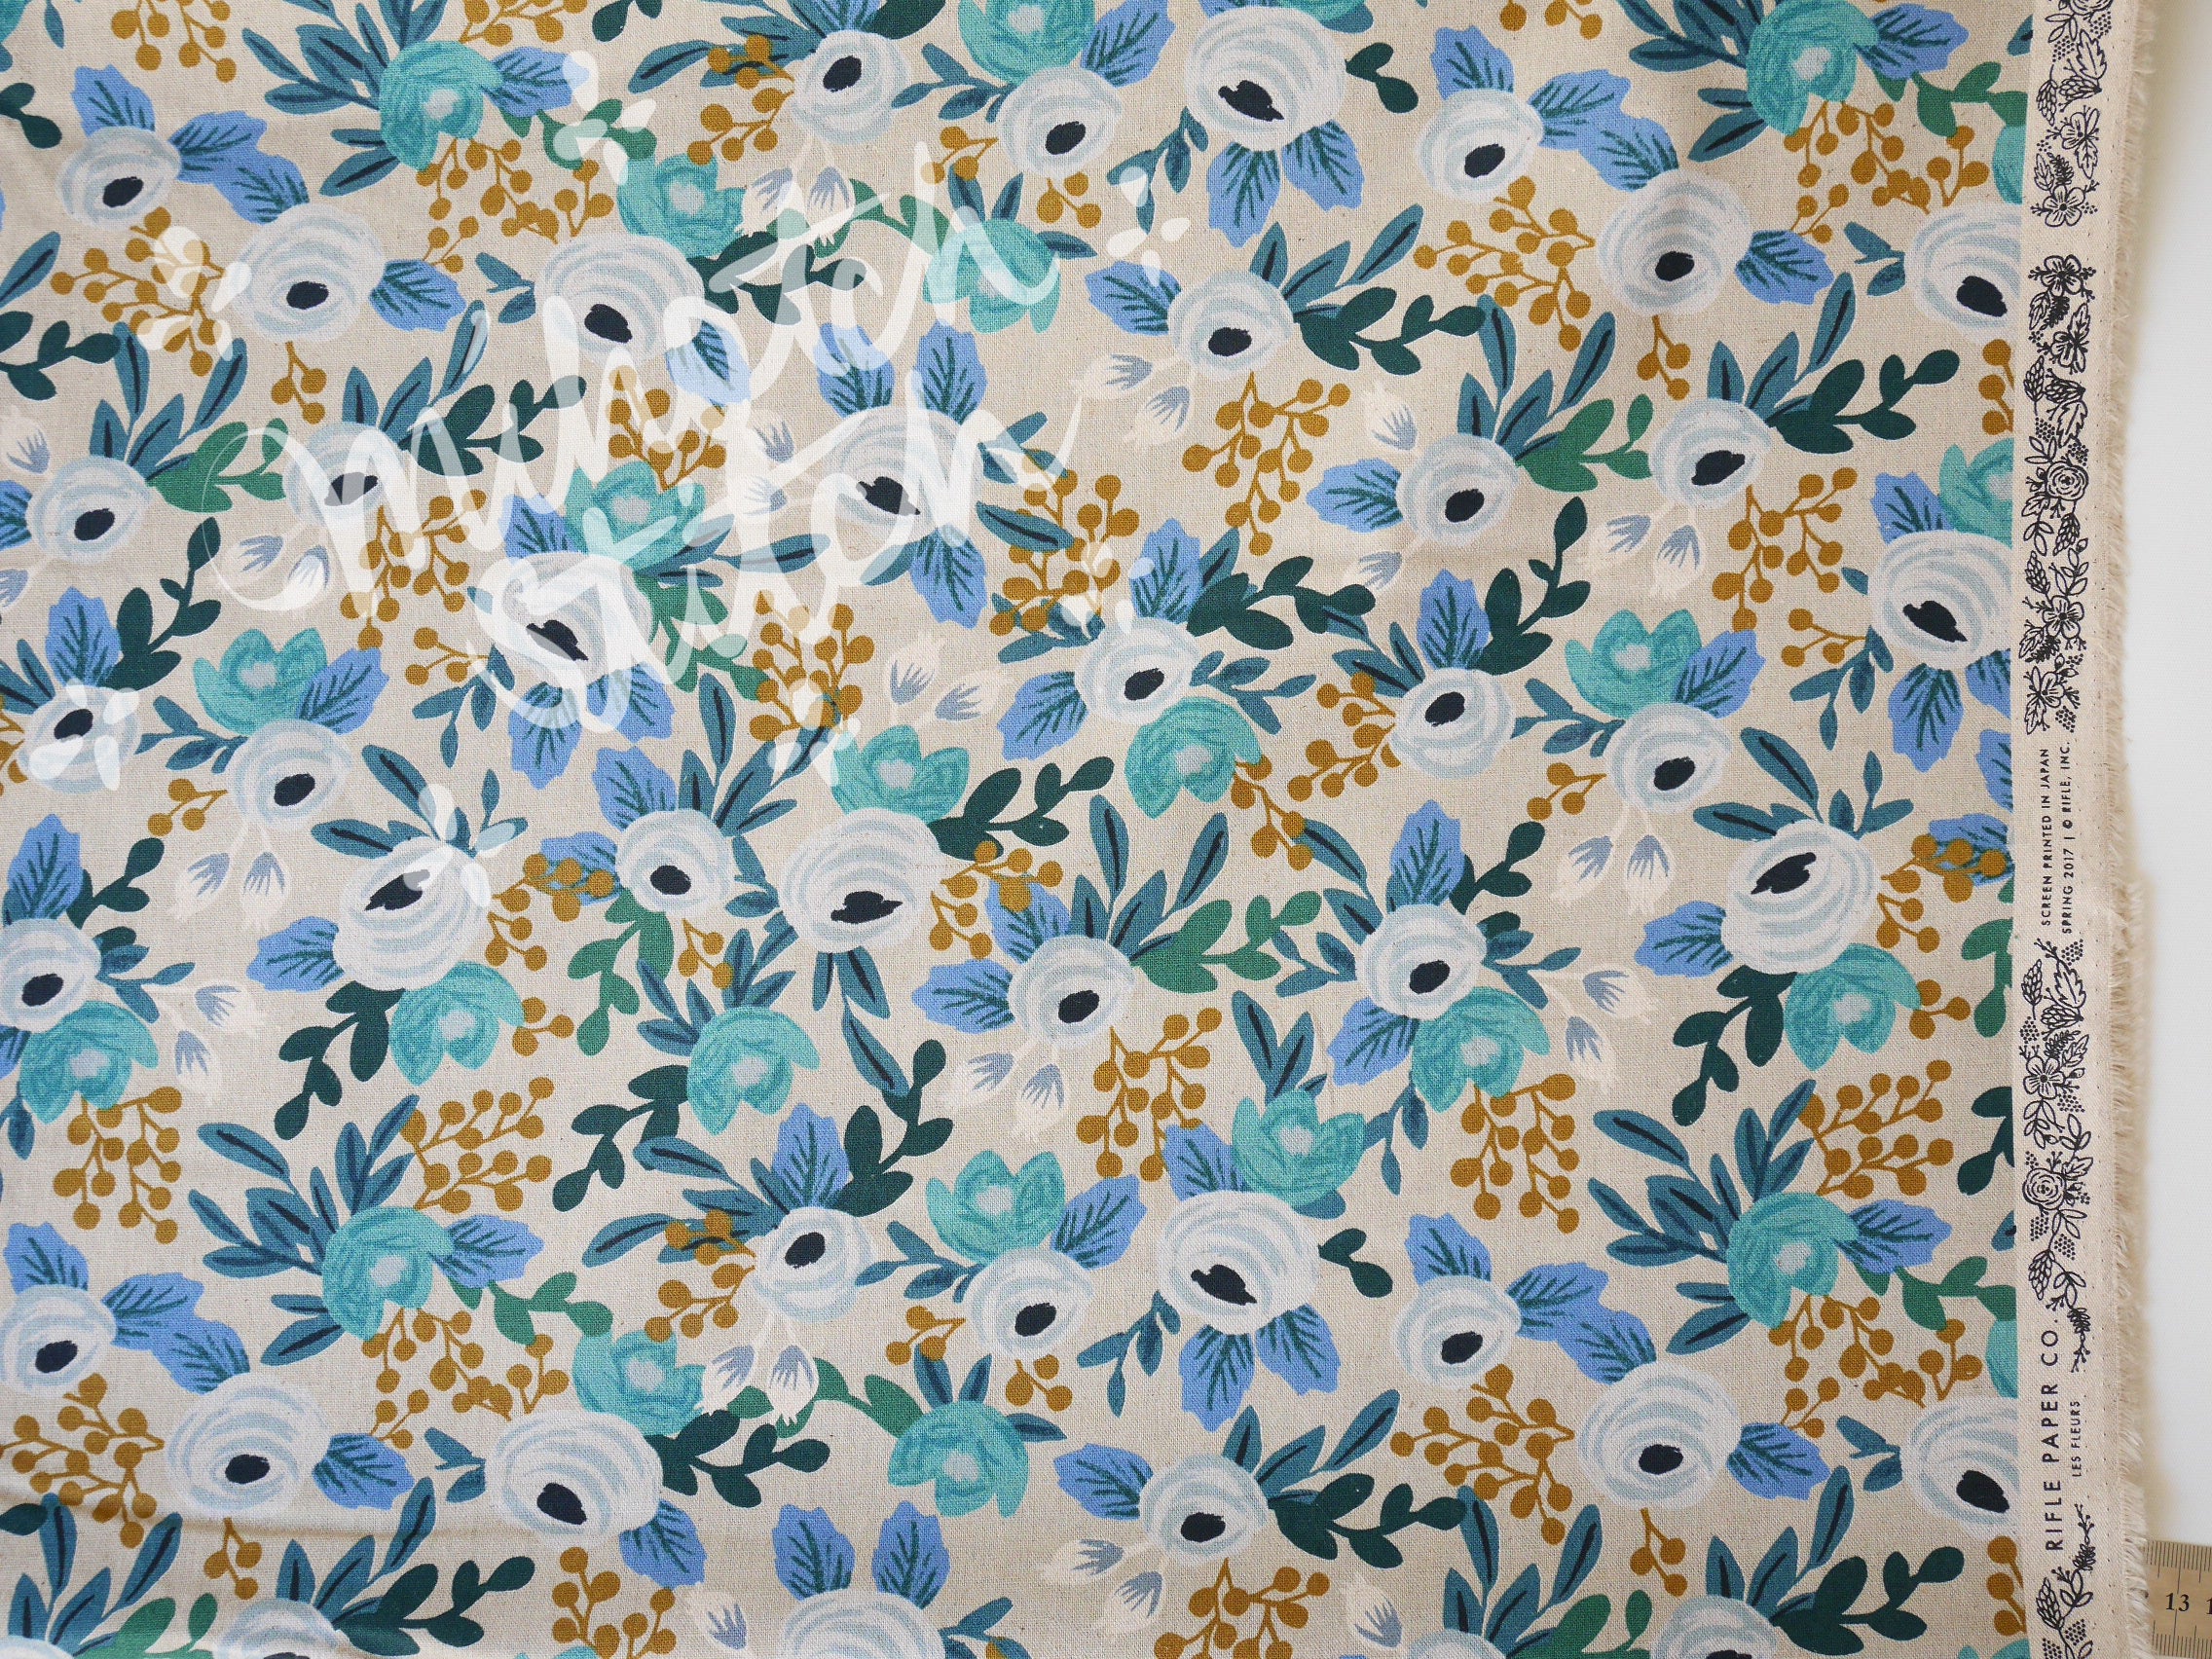 Rifle Paper Co. Garden party unbleached canvas Rosa in blue, Fabric Perth